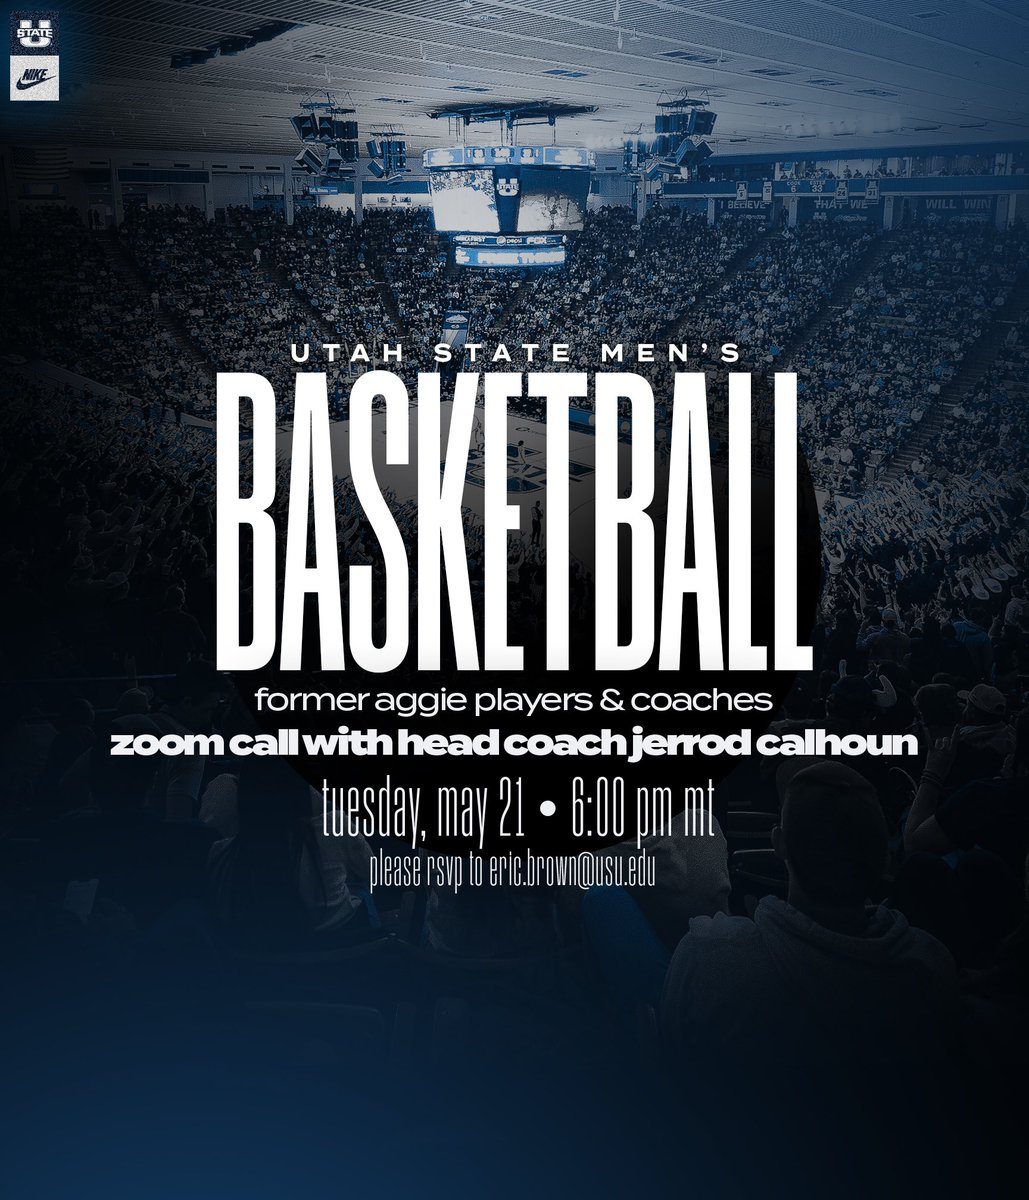 🚨Calling ALL former @USUBasketball players and coaches, join us Tuesday, May 21 at 6:00 PM MT for a Zoom call with @USUCoachCalhoun! Be sure to RSVP by emailing eric.brown@usu.edu!